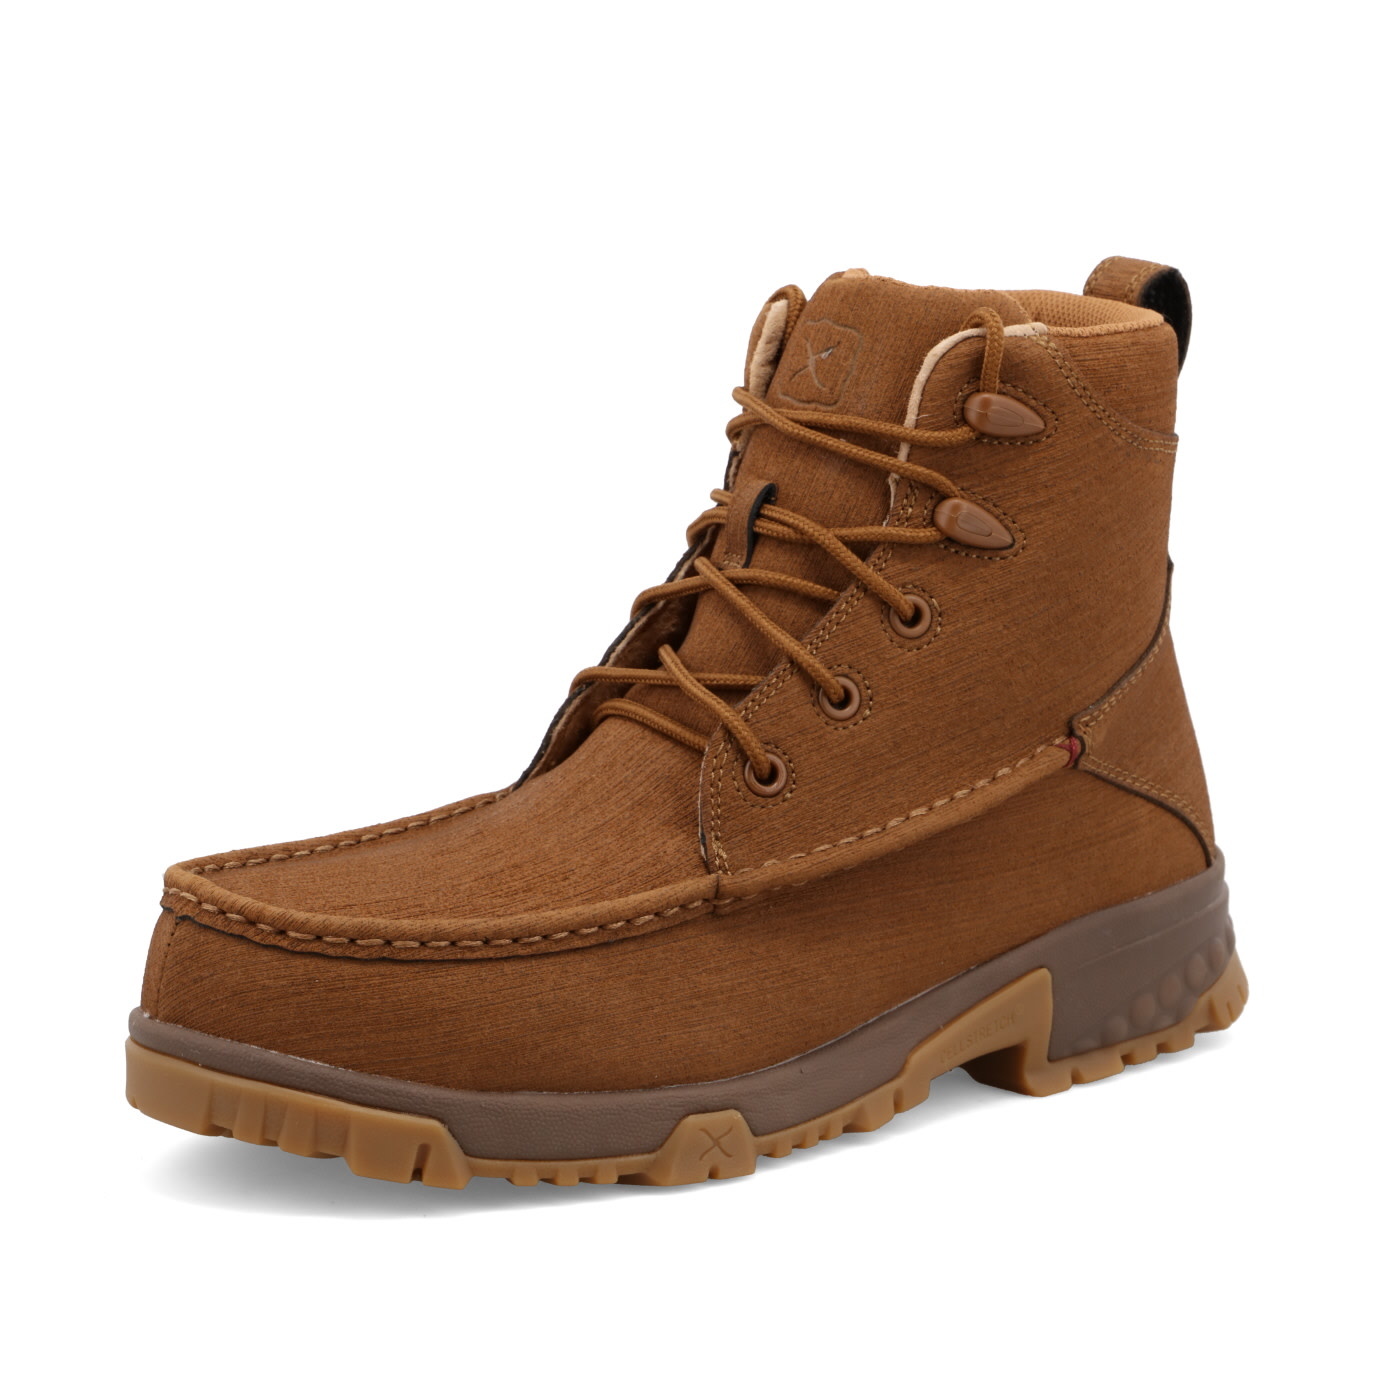 Twisted X 6" Composite Toe Work Boot With Cellstretch- Clay & Brown